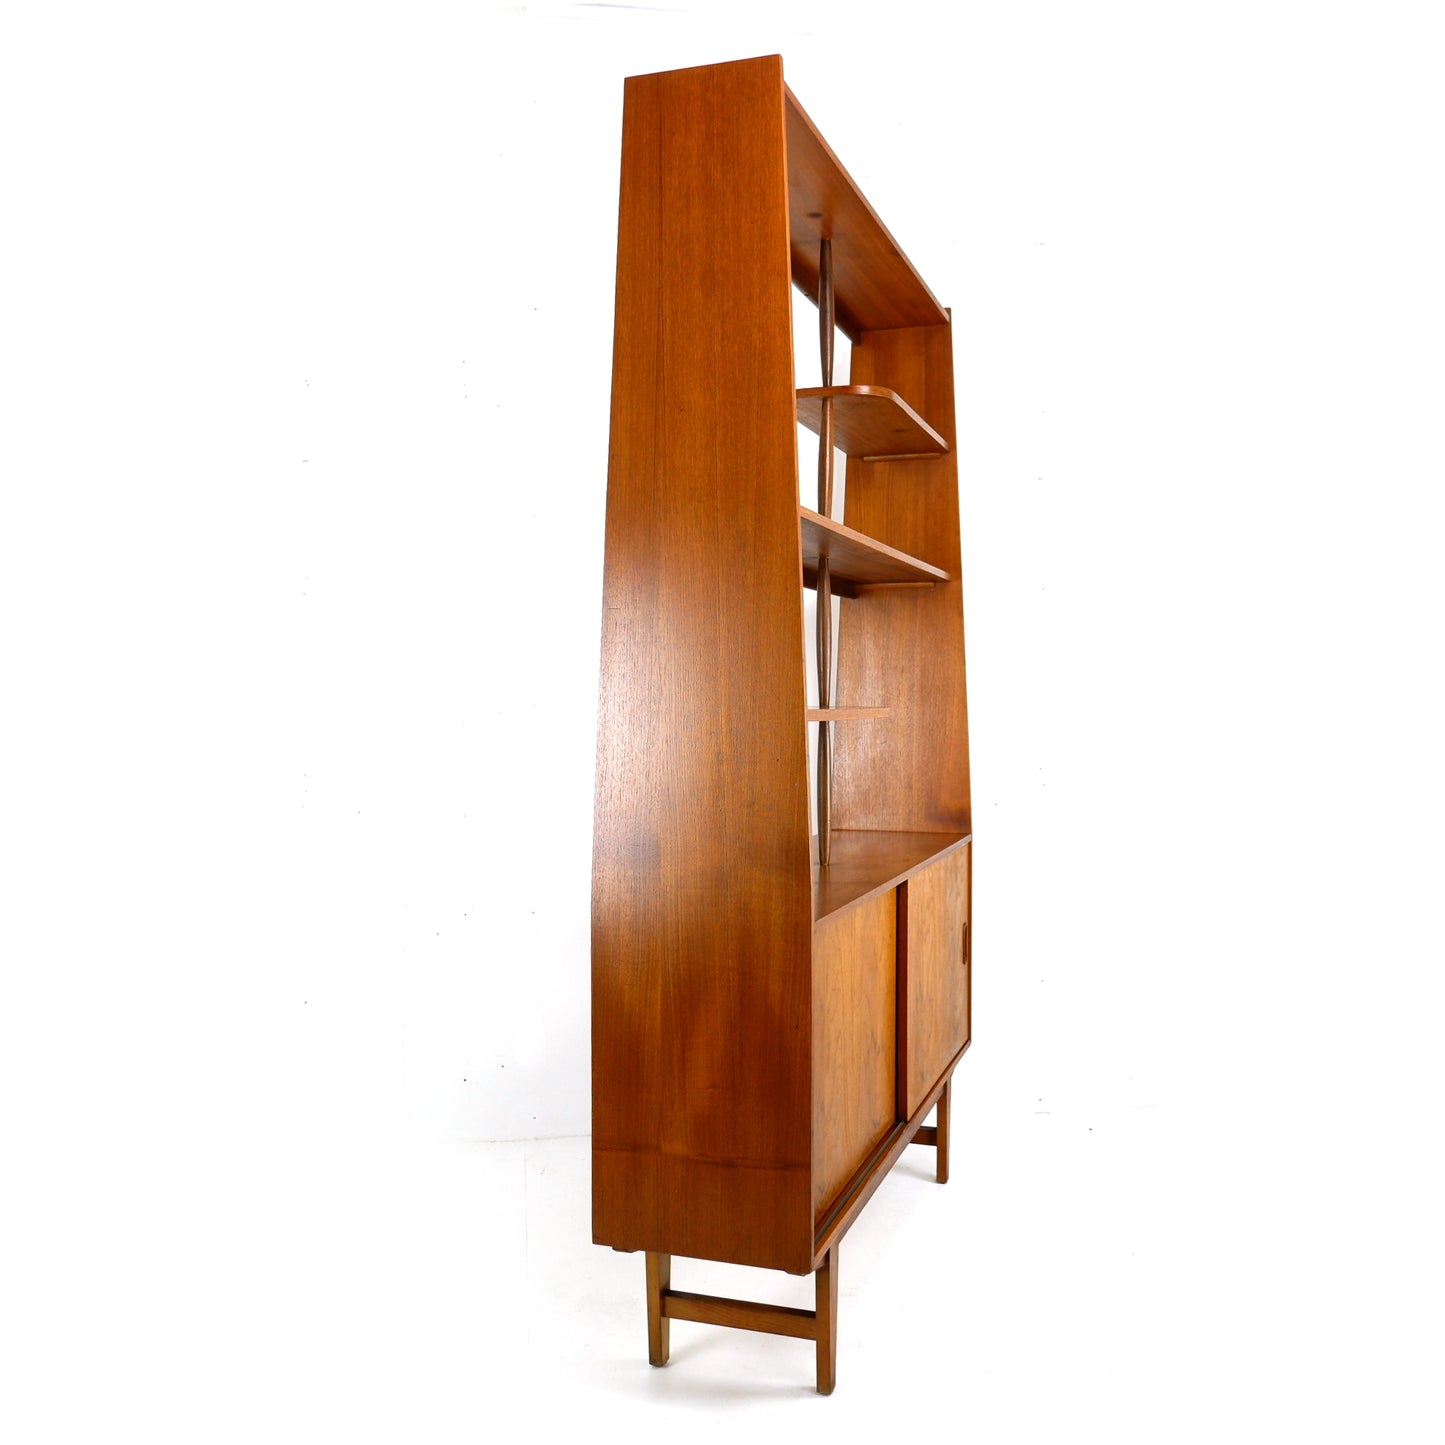 Mid Century Room Divider in Teak / Bookcase Shelving Unit with Cupboard